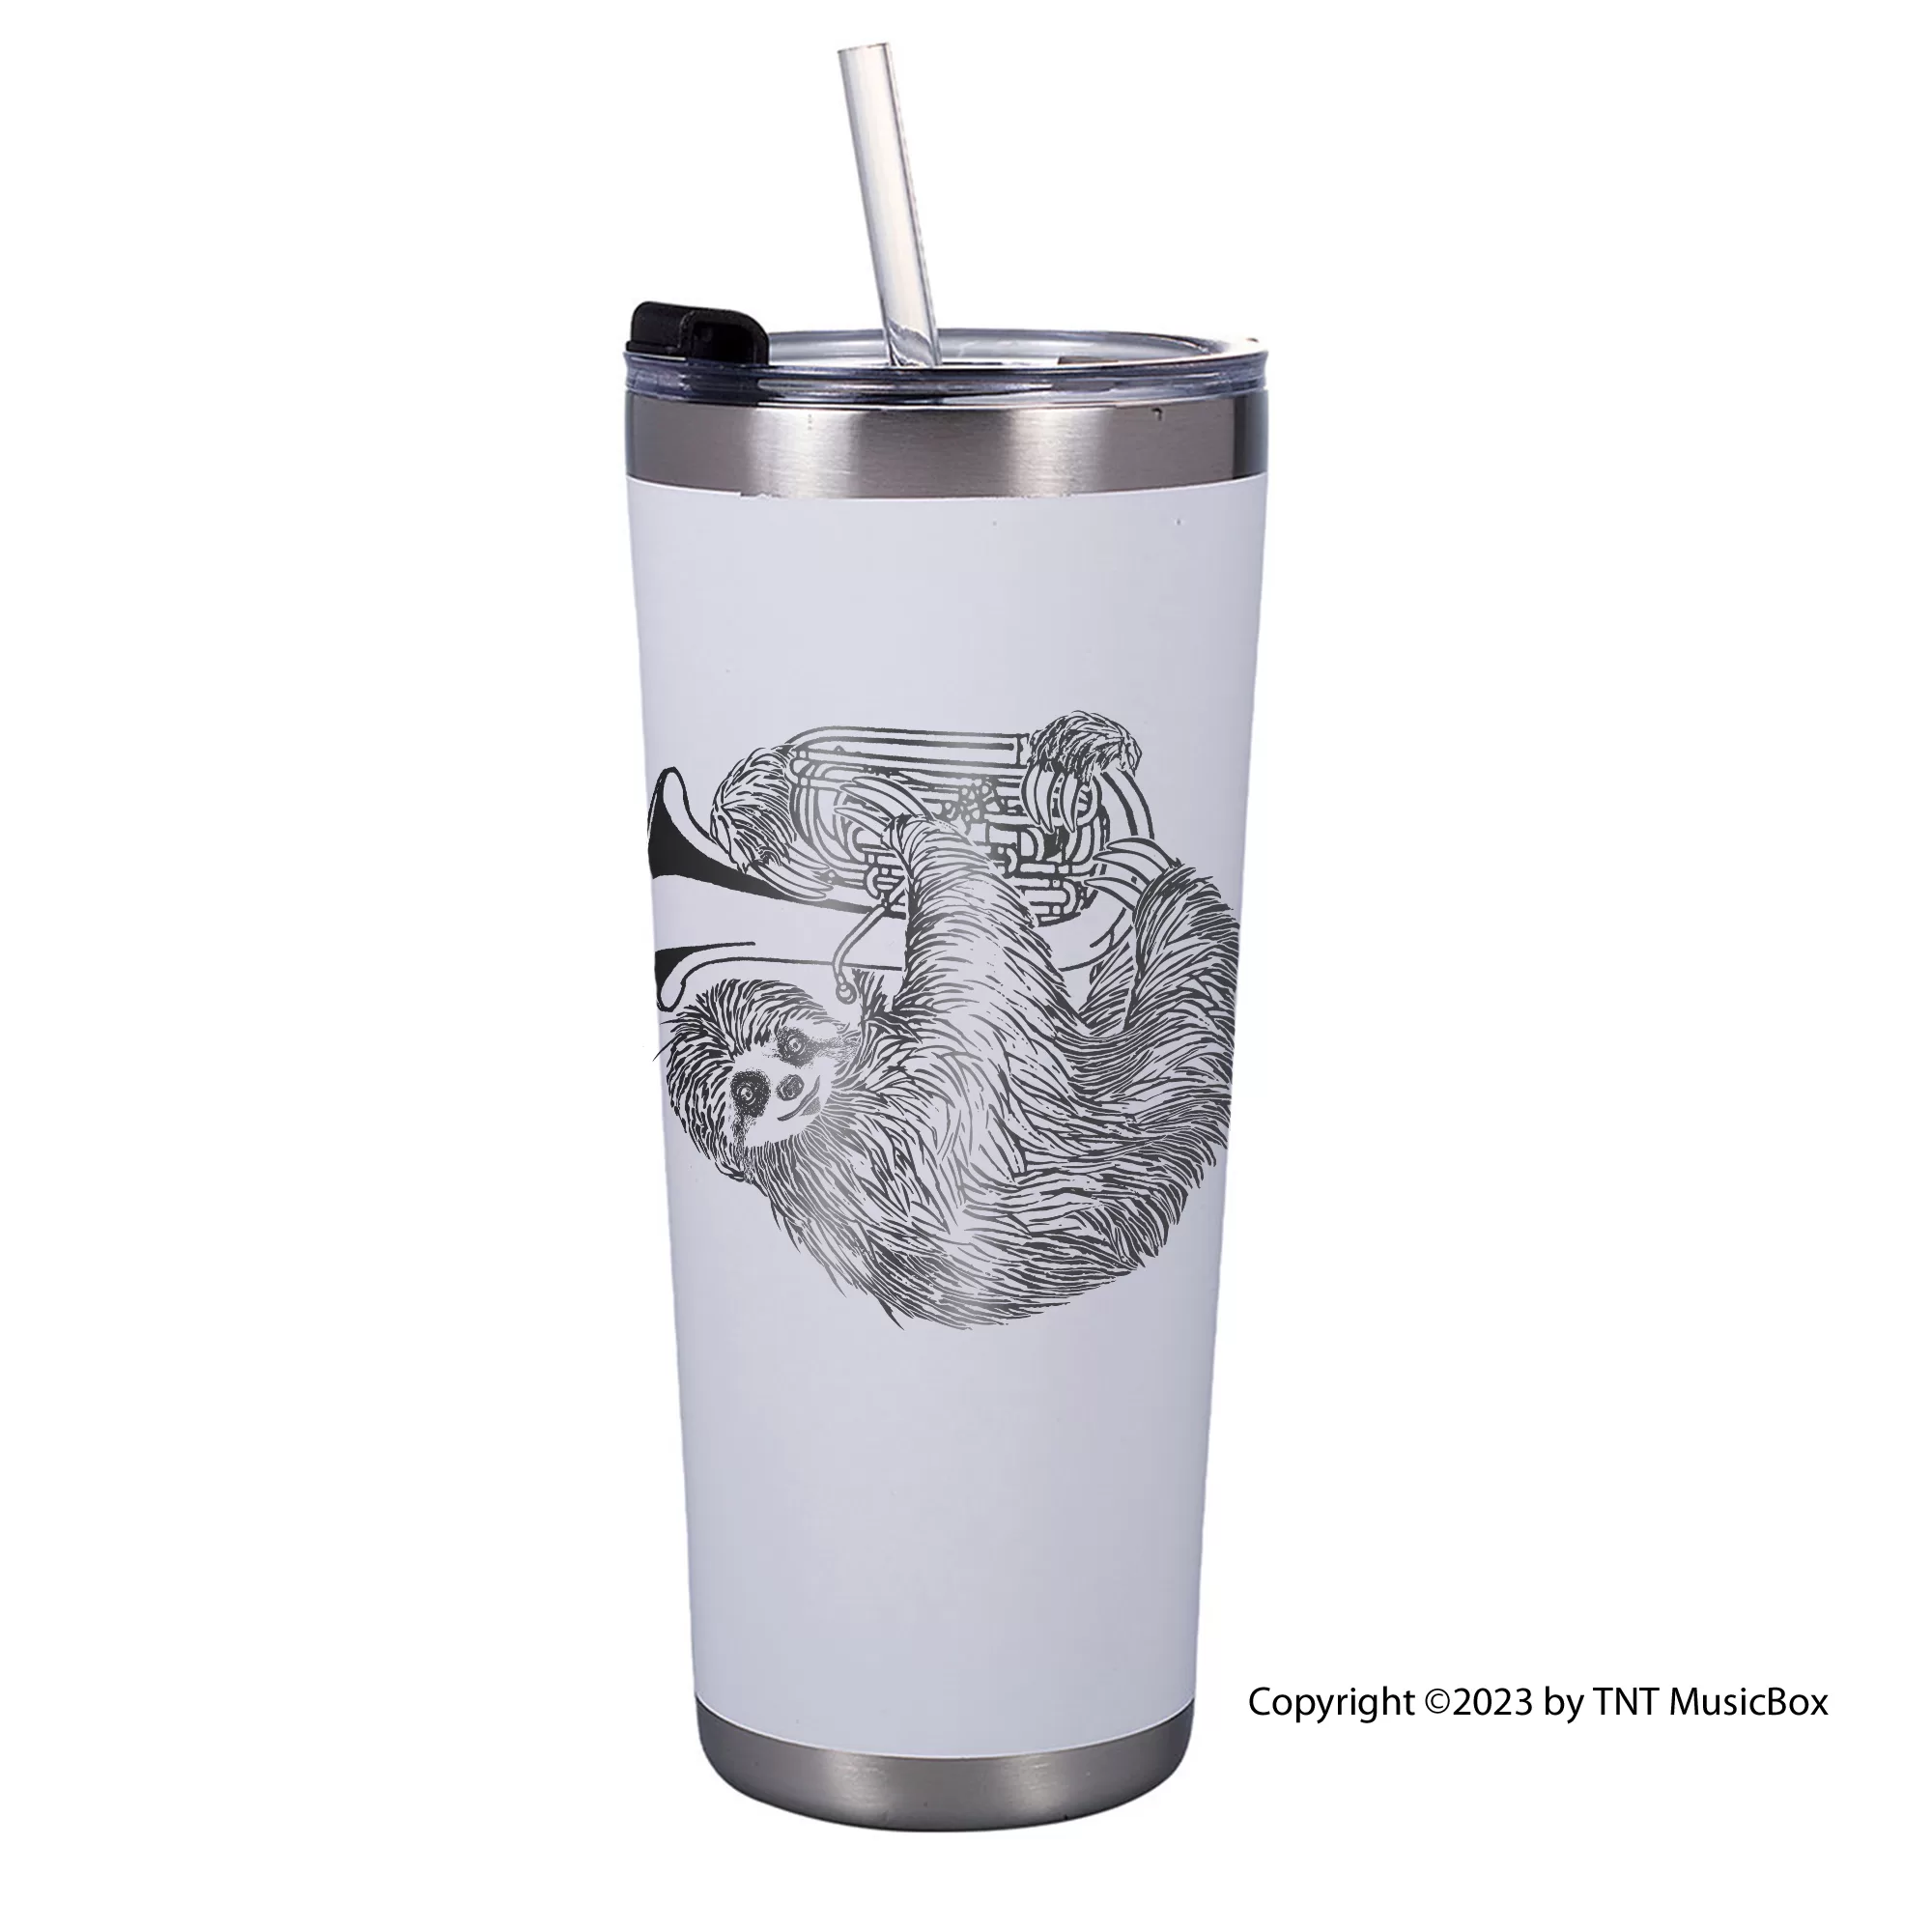 Sloth Playing Tuba on a White 20 0z. double wall stainless steel Tumbler.